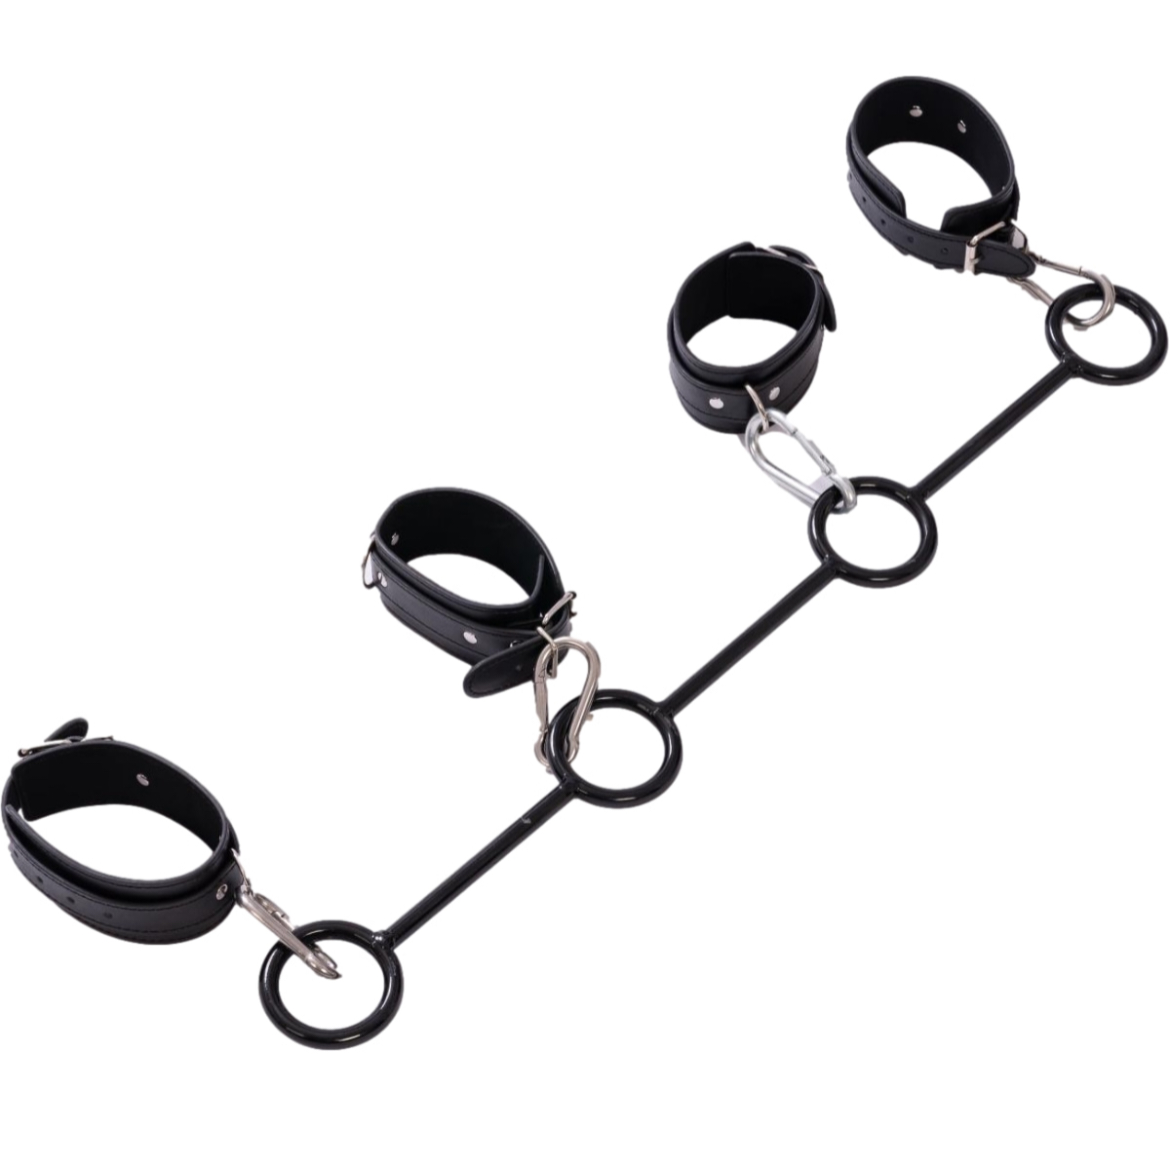 Spreaders, wrist cuffs and ankle cuffs in vegan leather attached to a leather covered metal rod with brass fasteners. An exciting sex aid and fetish sex toy.